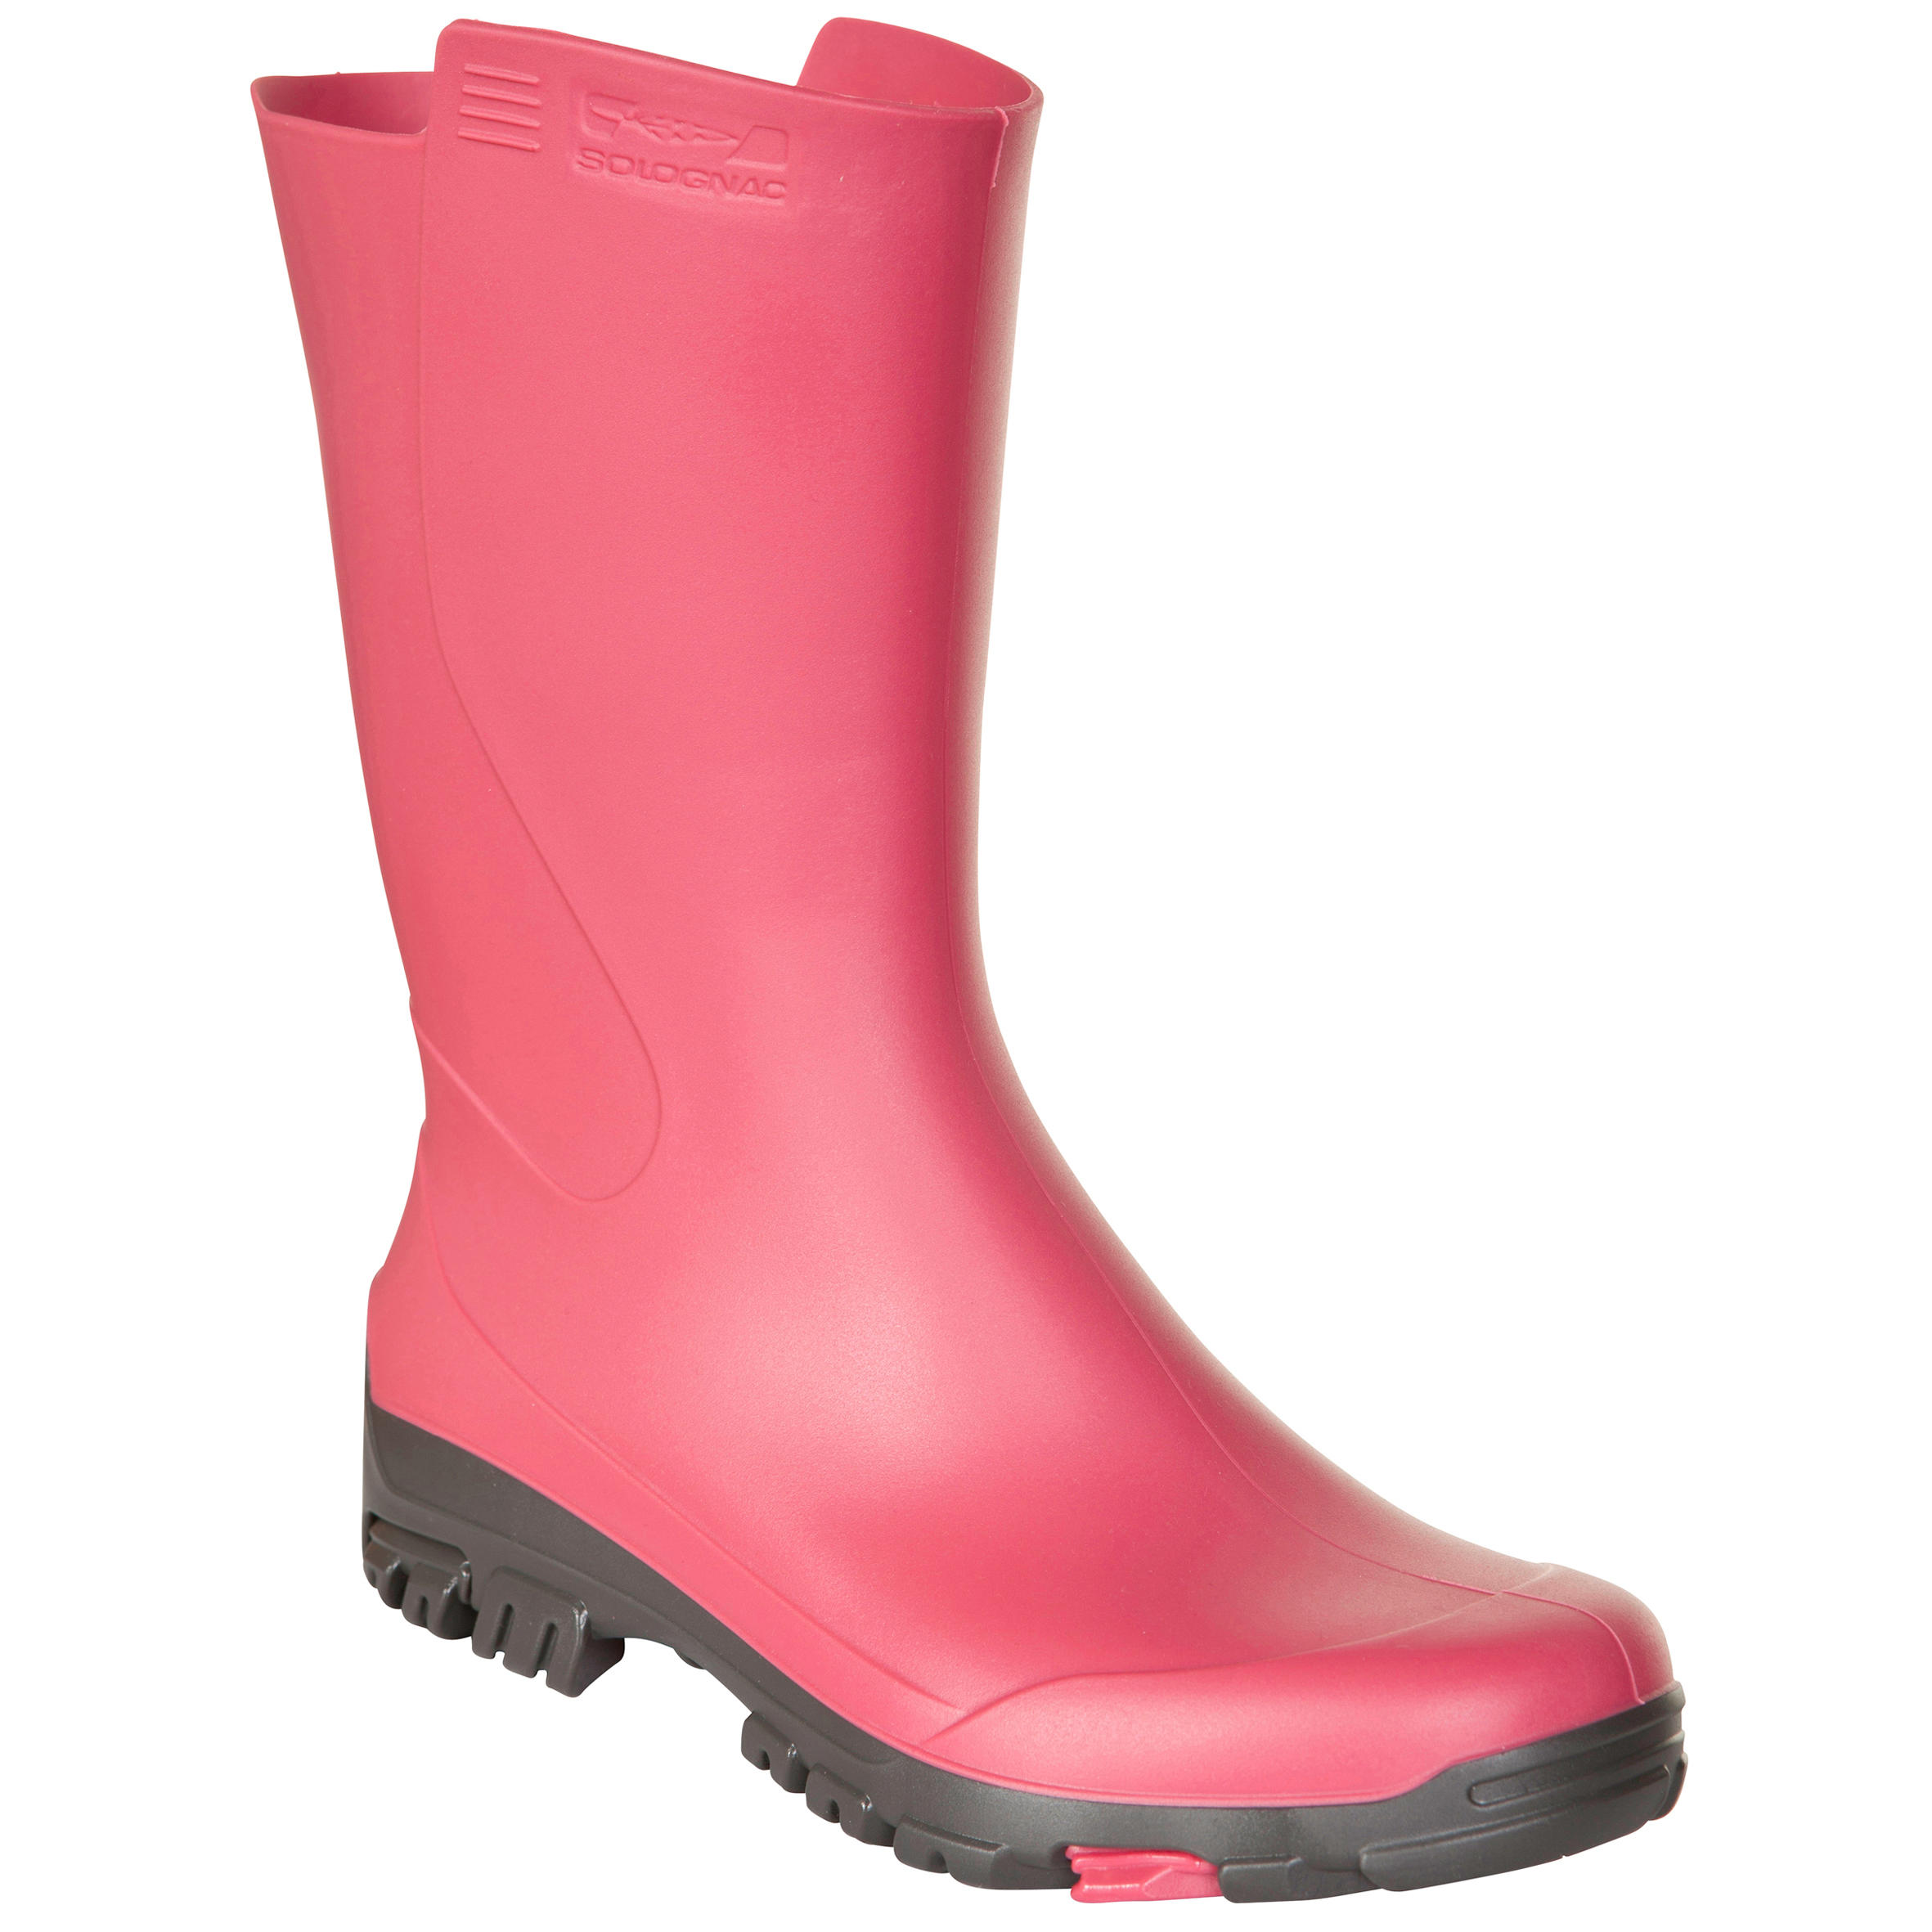 SOLOGNAC Inverness 100 Women's Ankle Boots - Pink